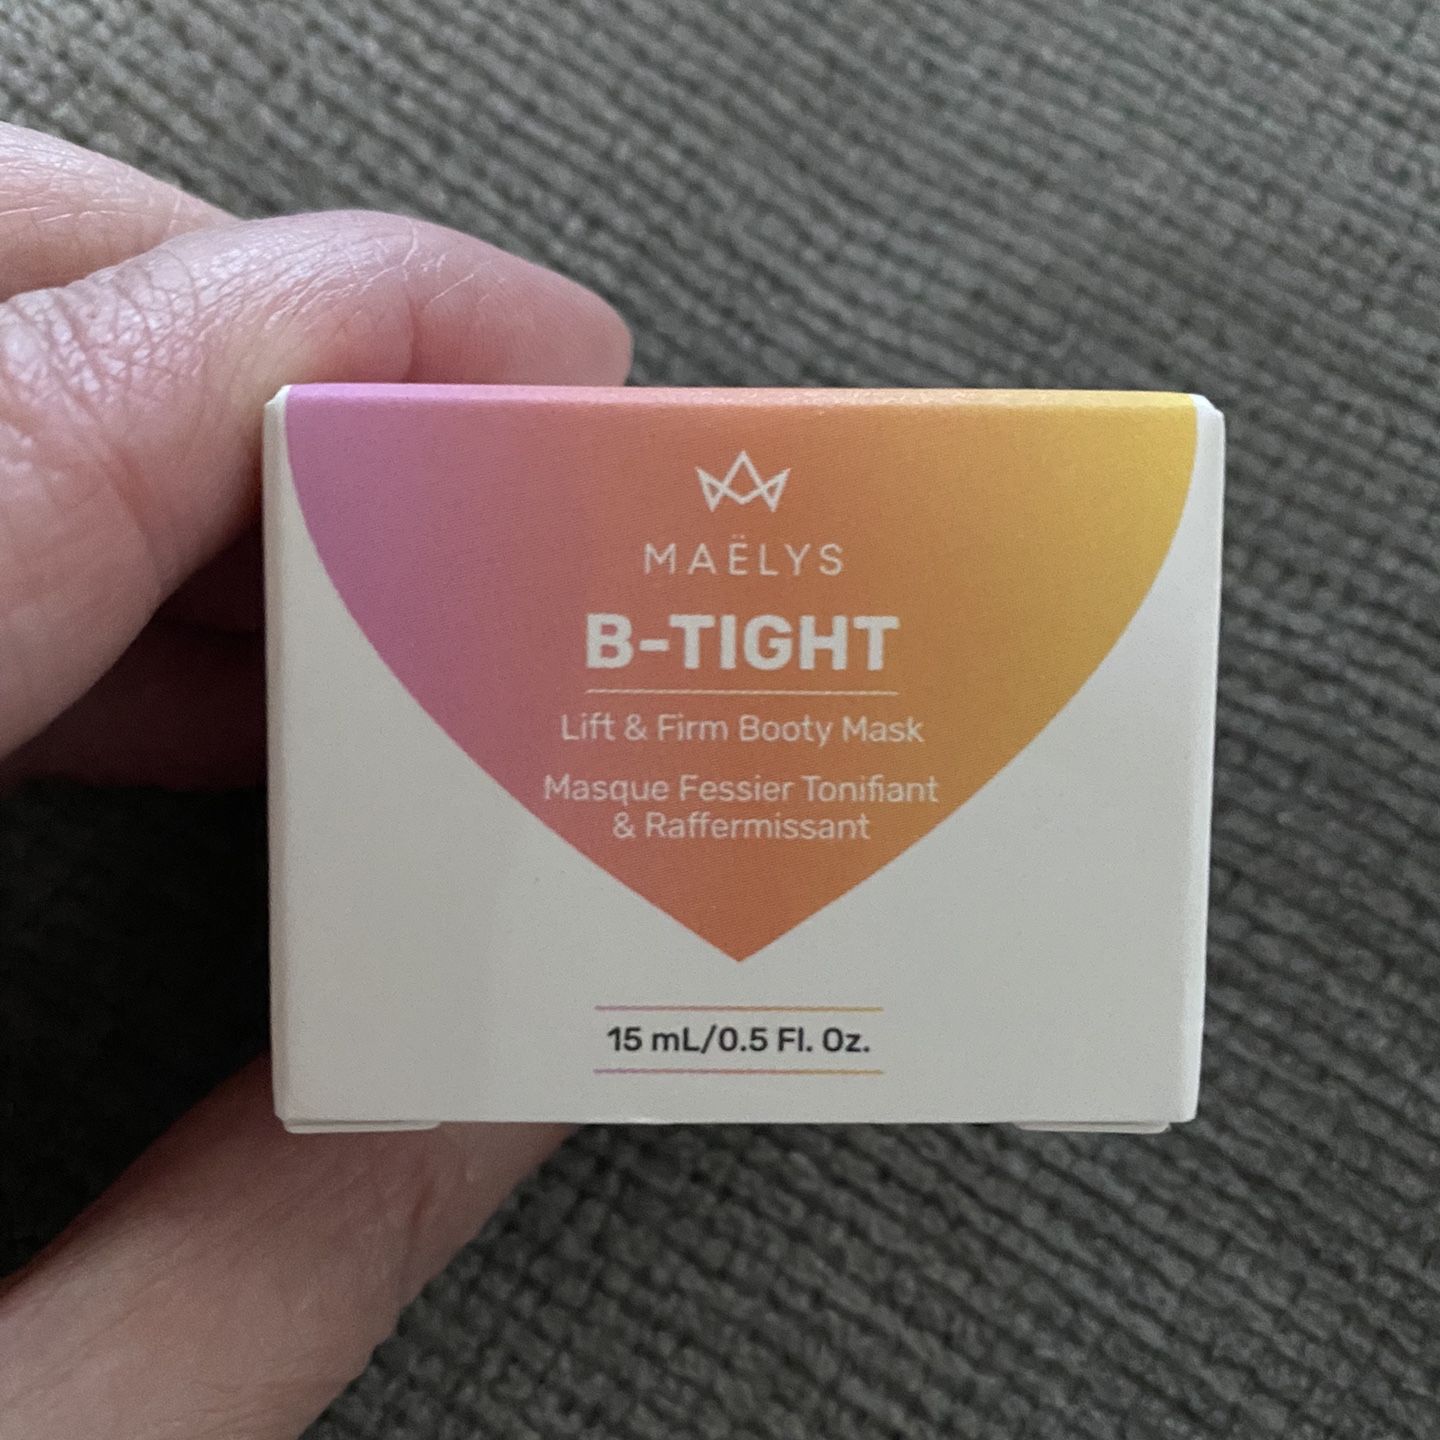 NEW MAELYS B-TIGHT LIFT & FIRM BOOTY MASK $5! for Sale in Buckeye